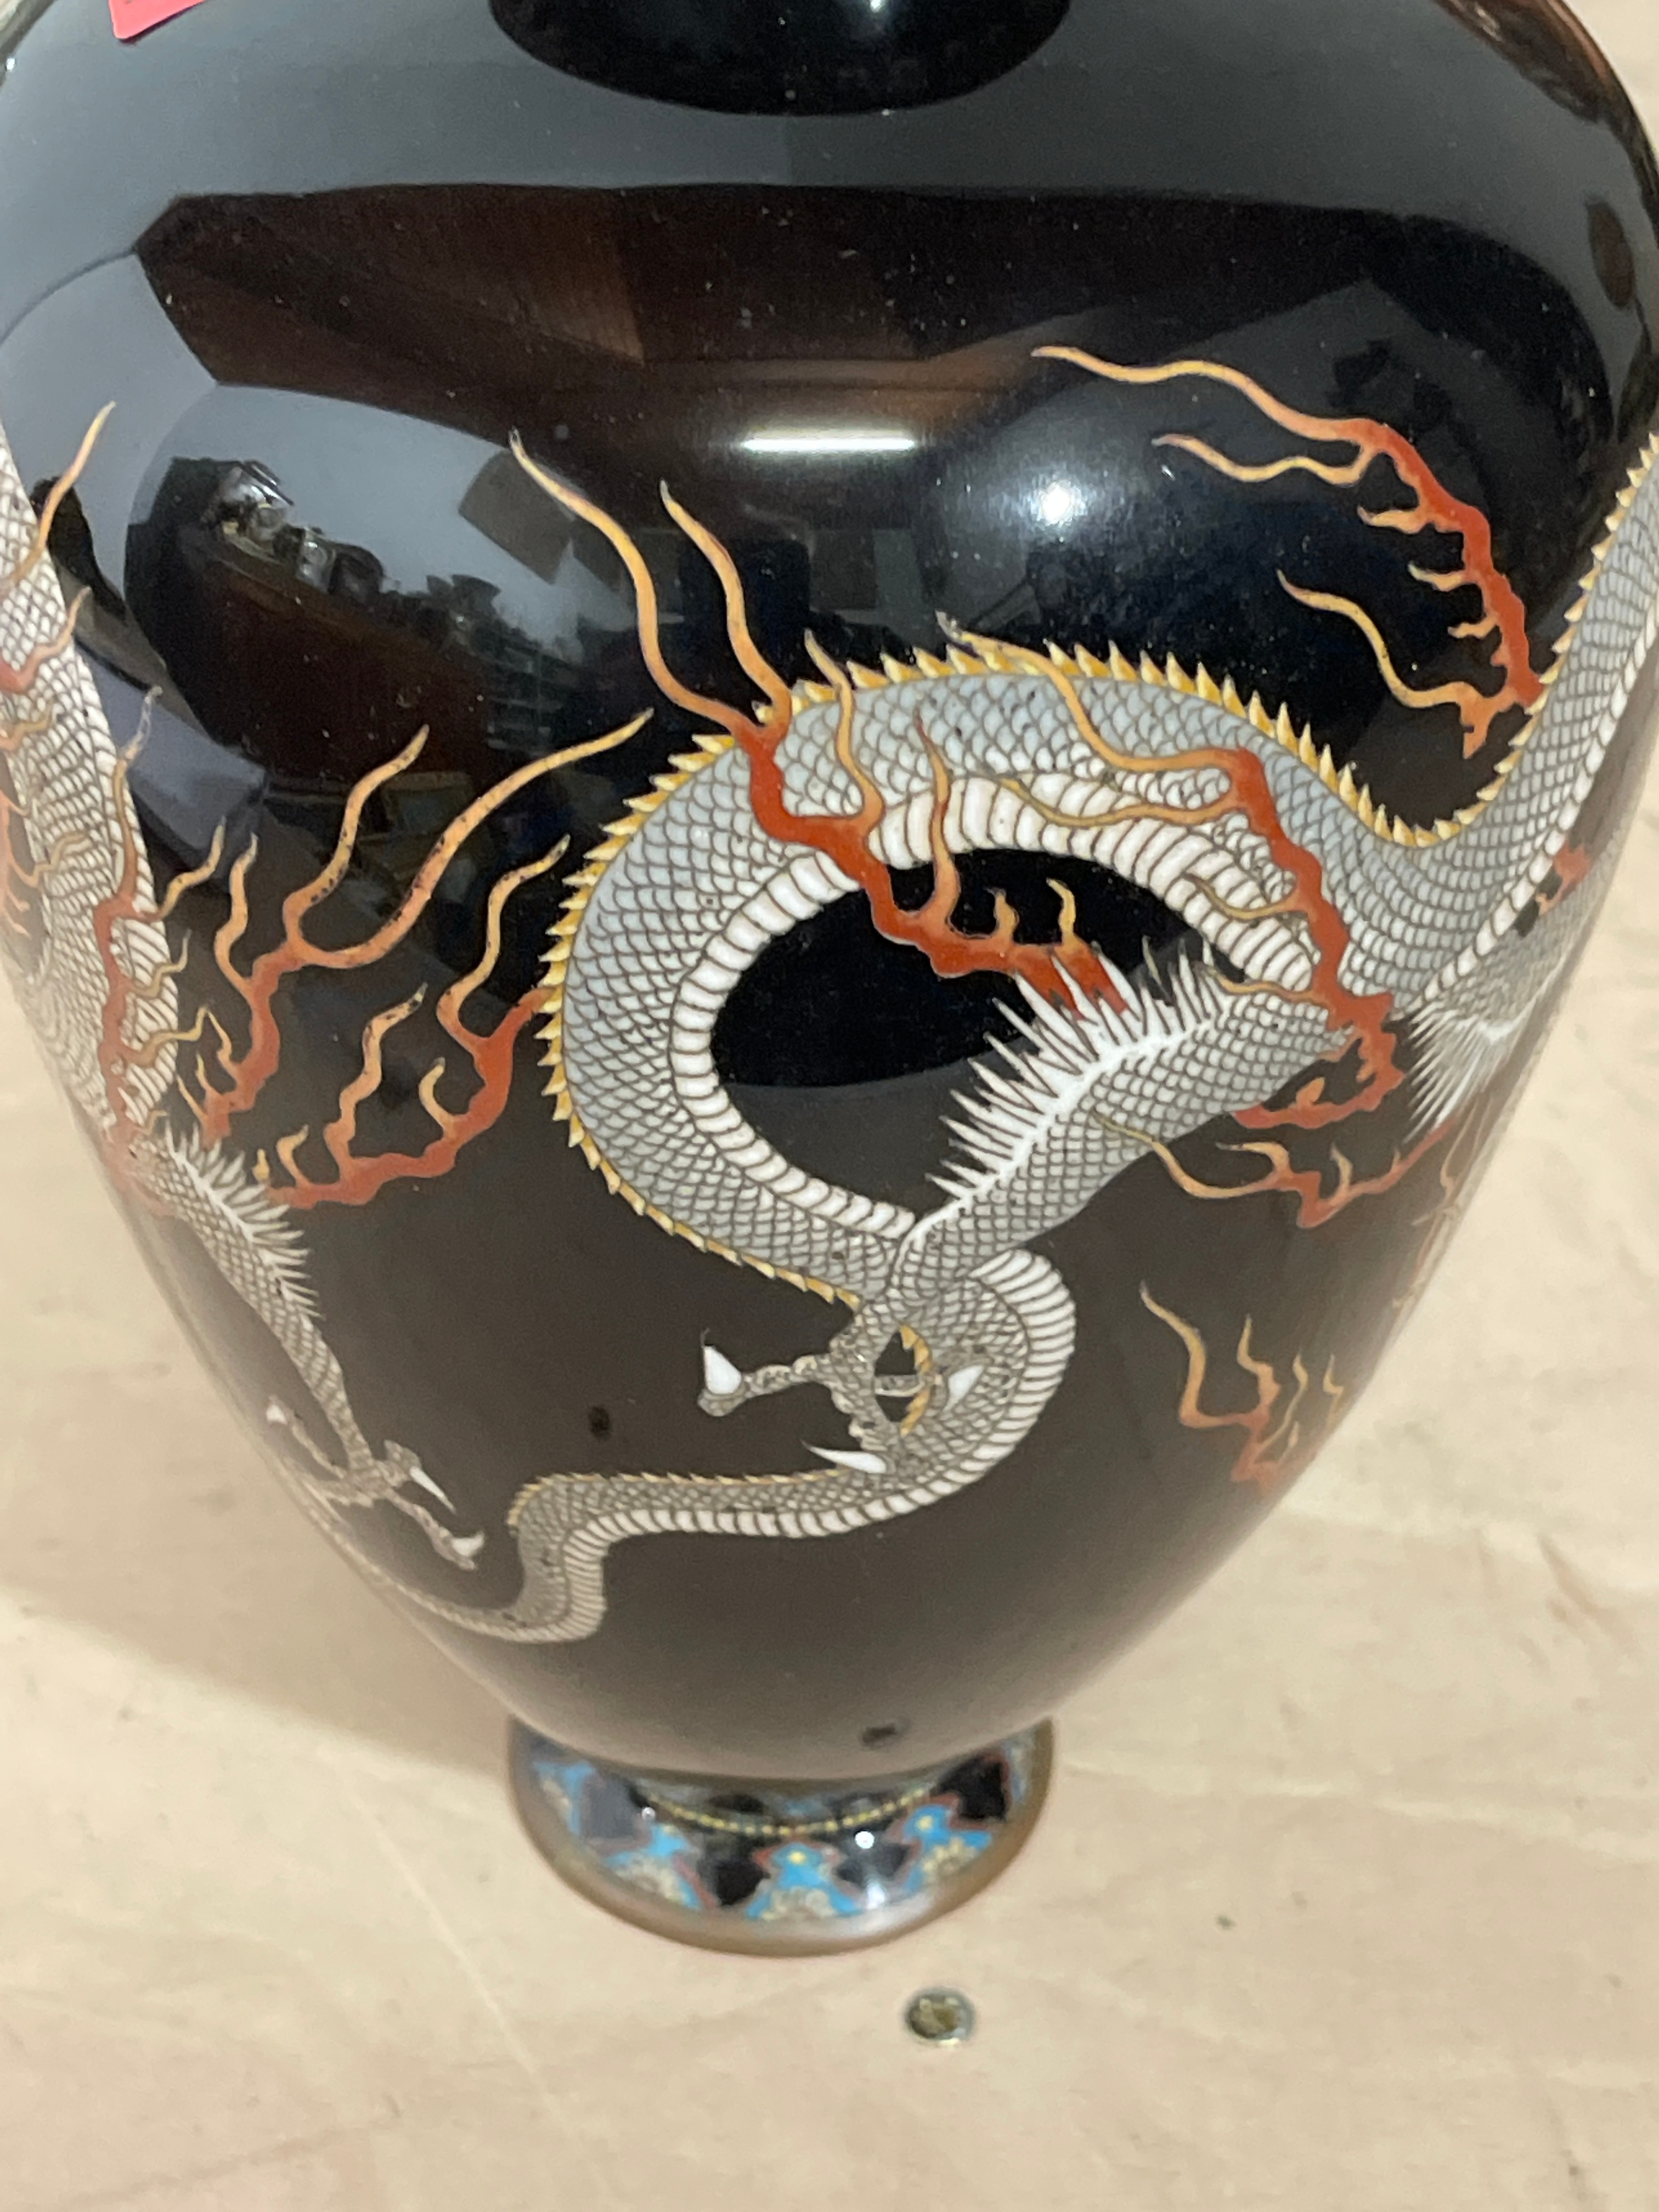 Lot of Cloisonne Dragon Vase 240mm tall and 150mm wide. - Image 3 of 10